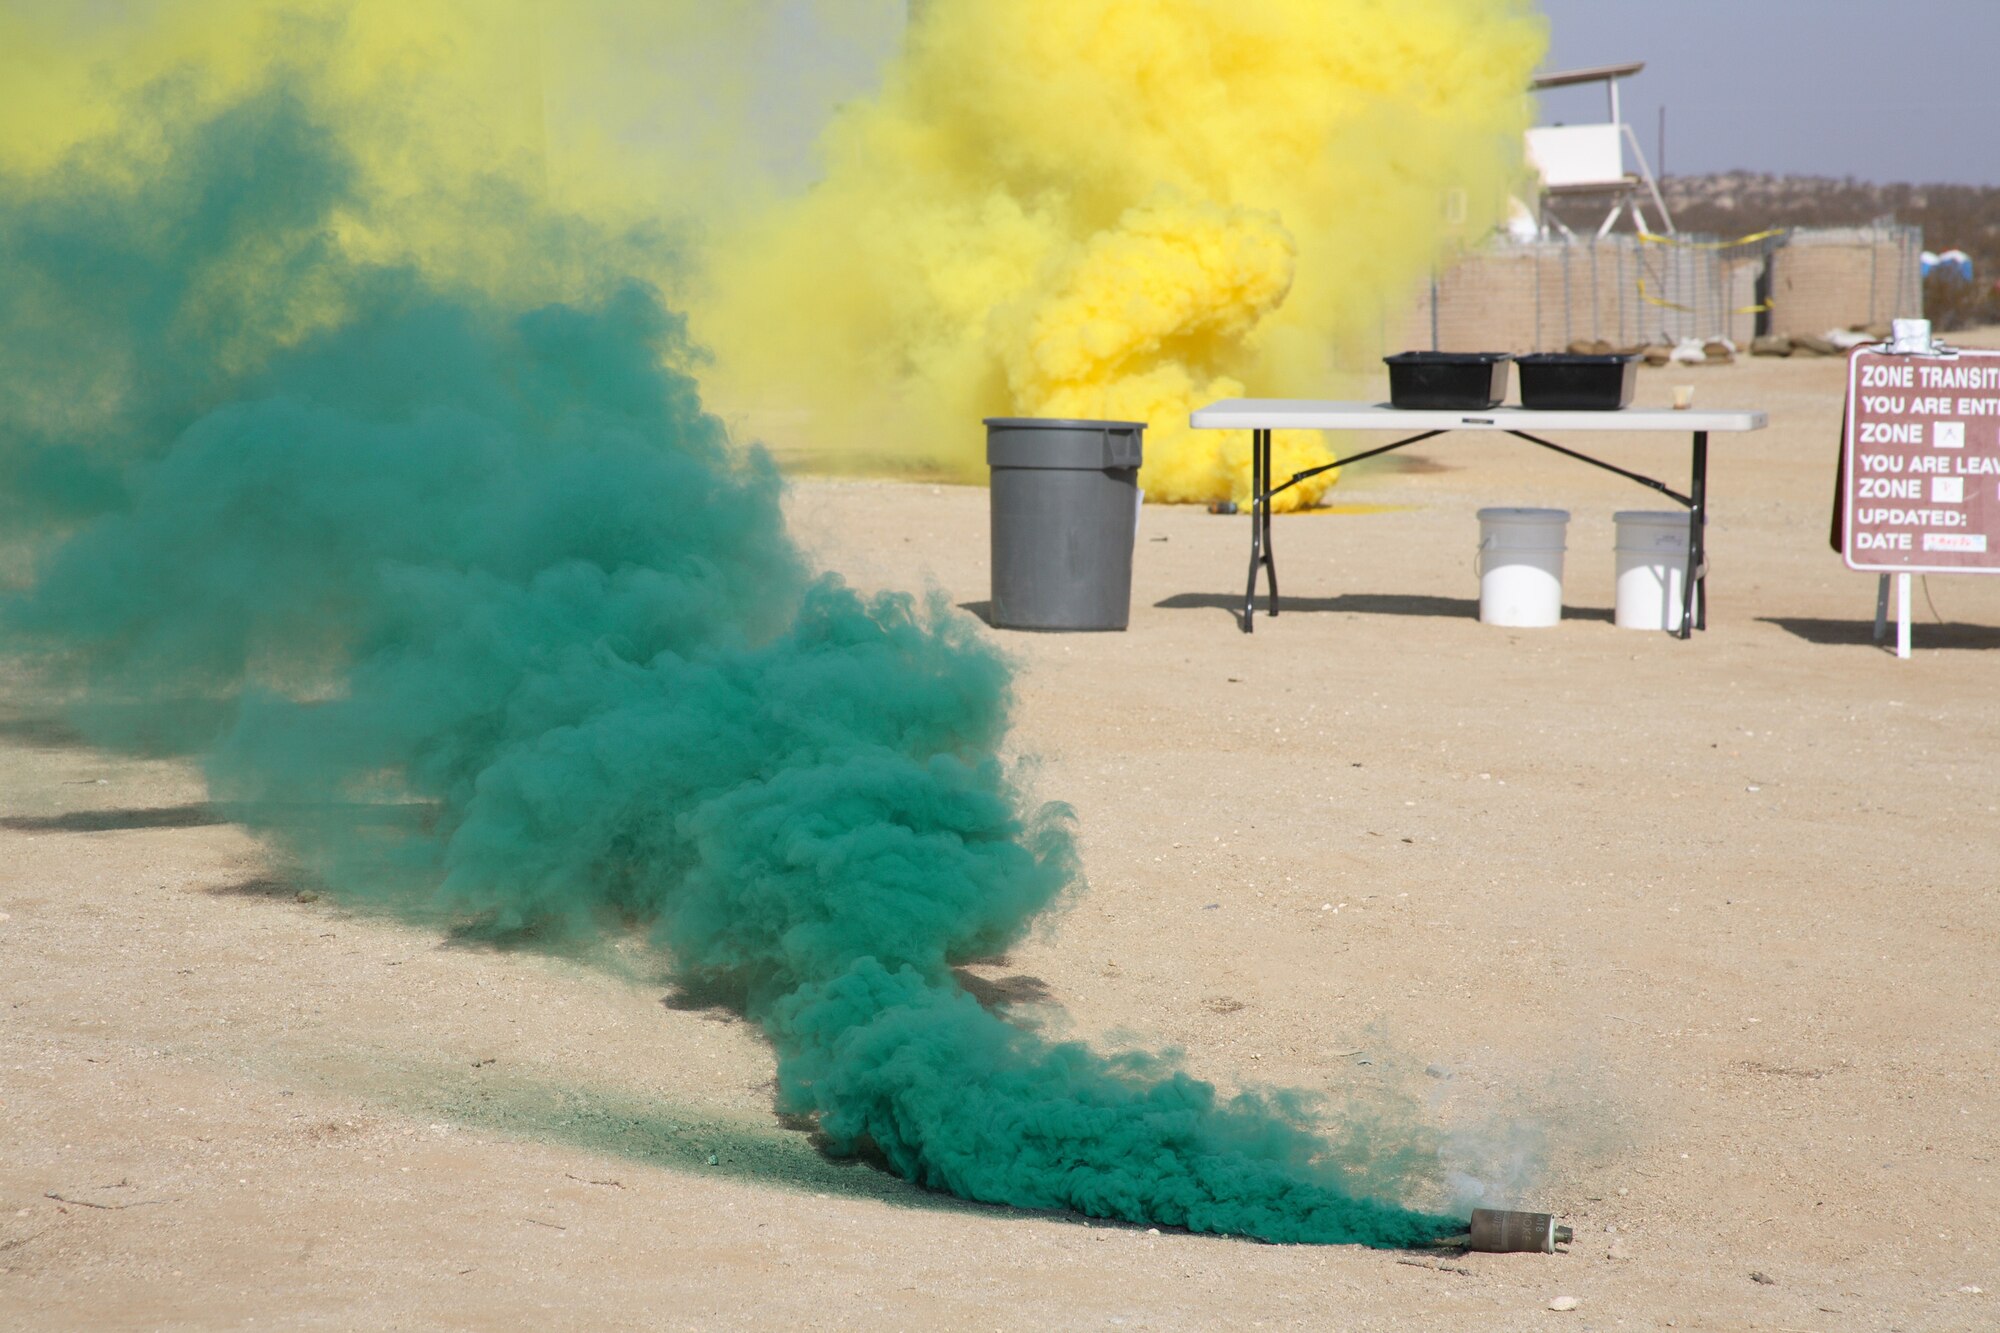 Green and yellow smoke covers Camp Corum after a simulated chemical attack. (Photo by Jet Fabara)